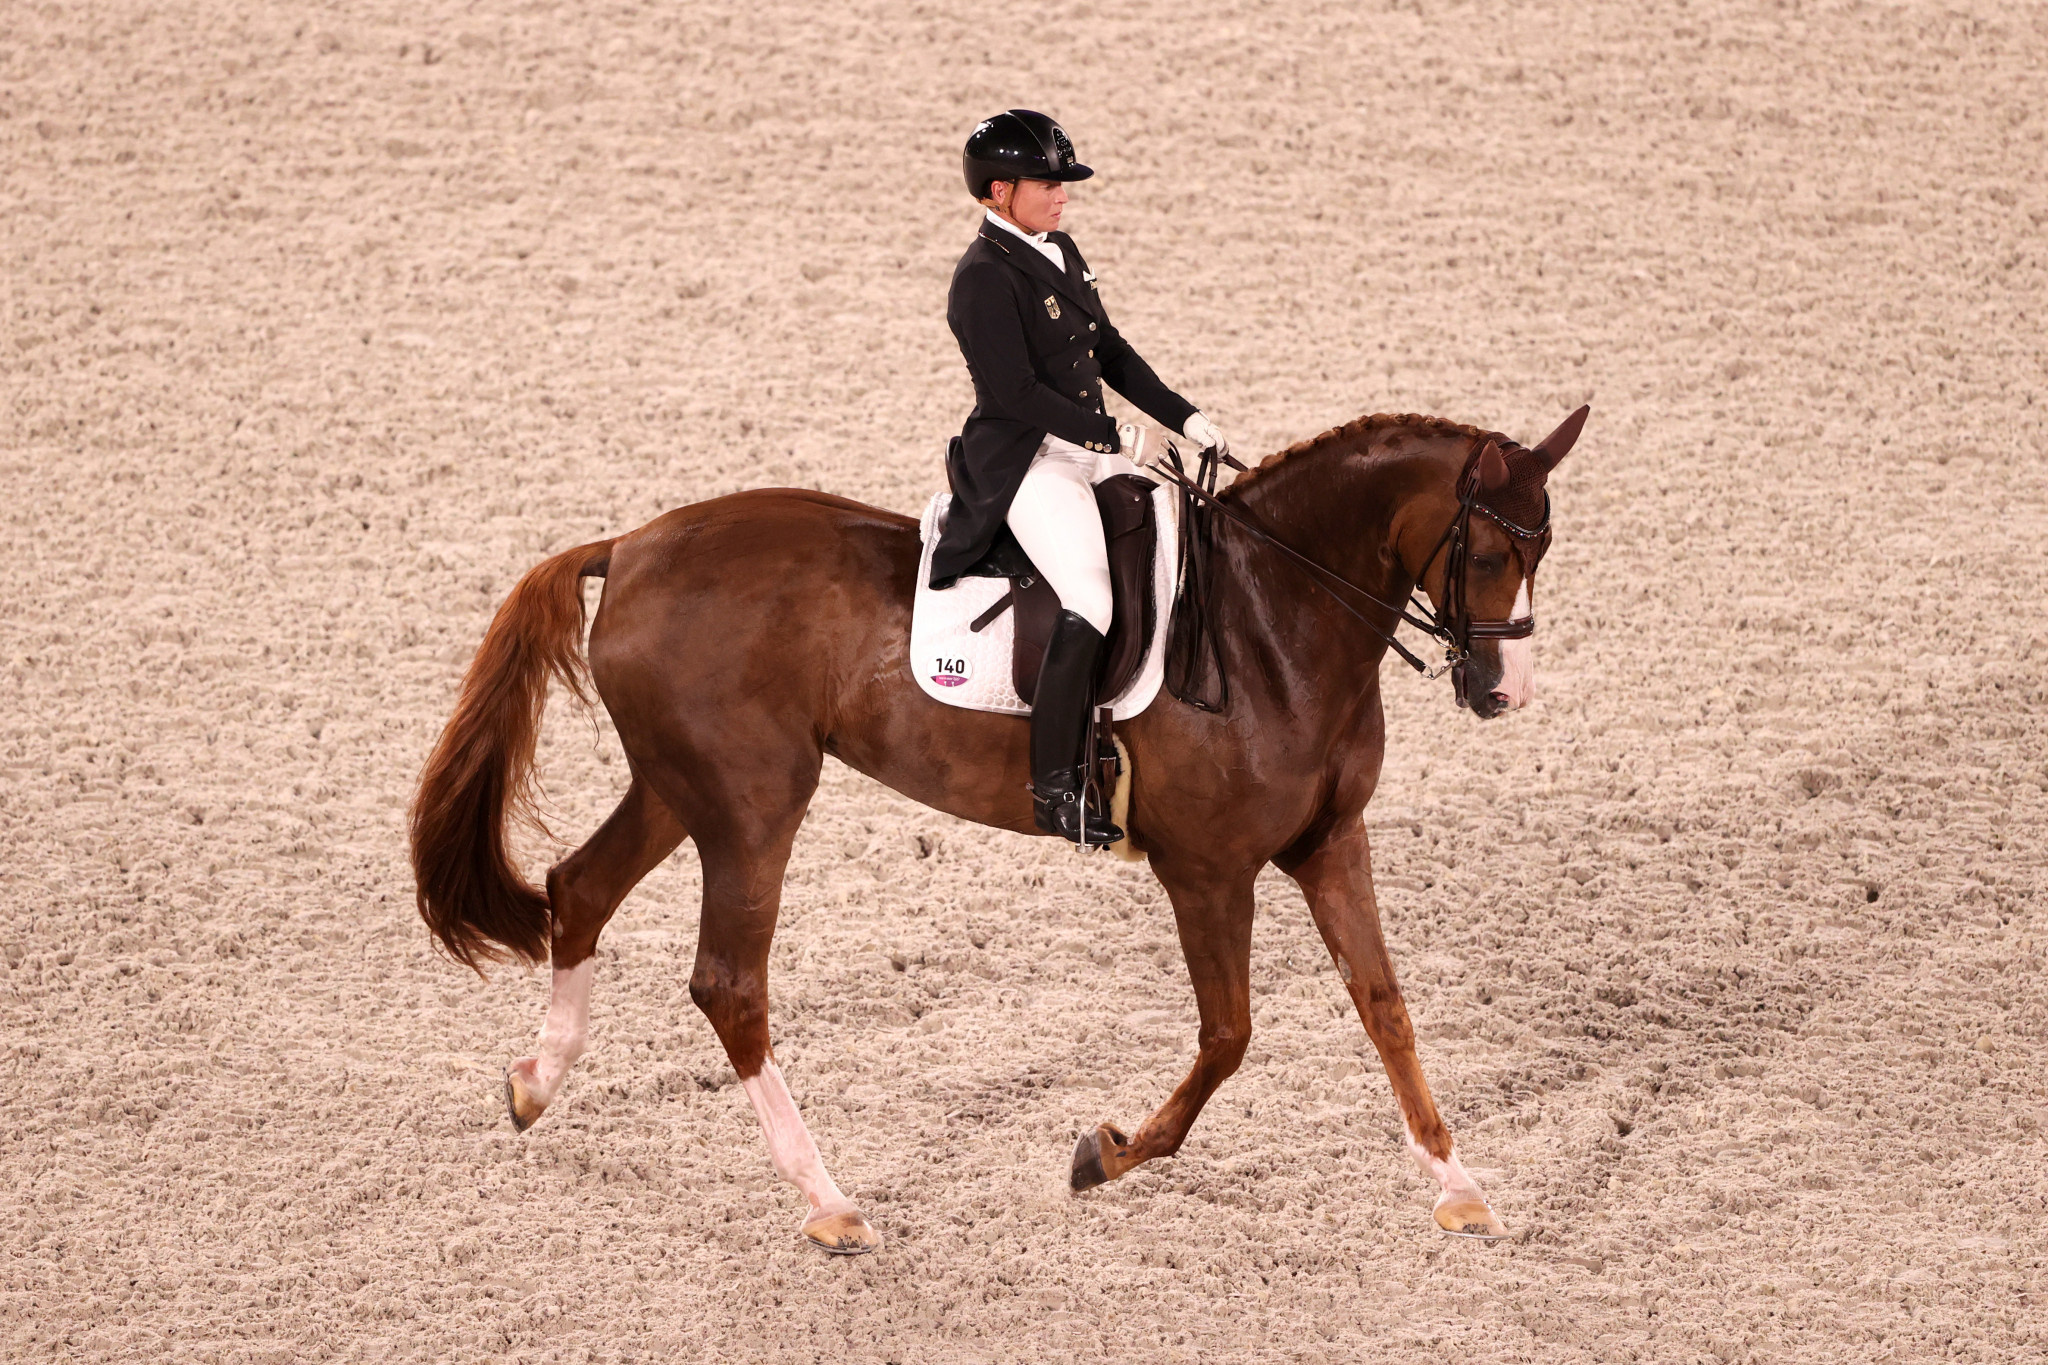 Dressage: FEI, European Championships 2021, Germany's Isabell Werth rider in Individual dressage. 2050x1370 HD Wallpaper.